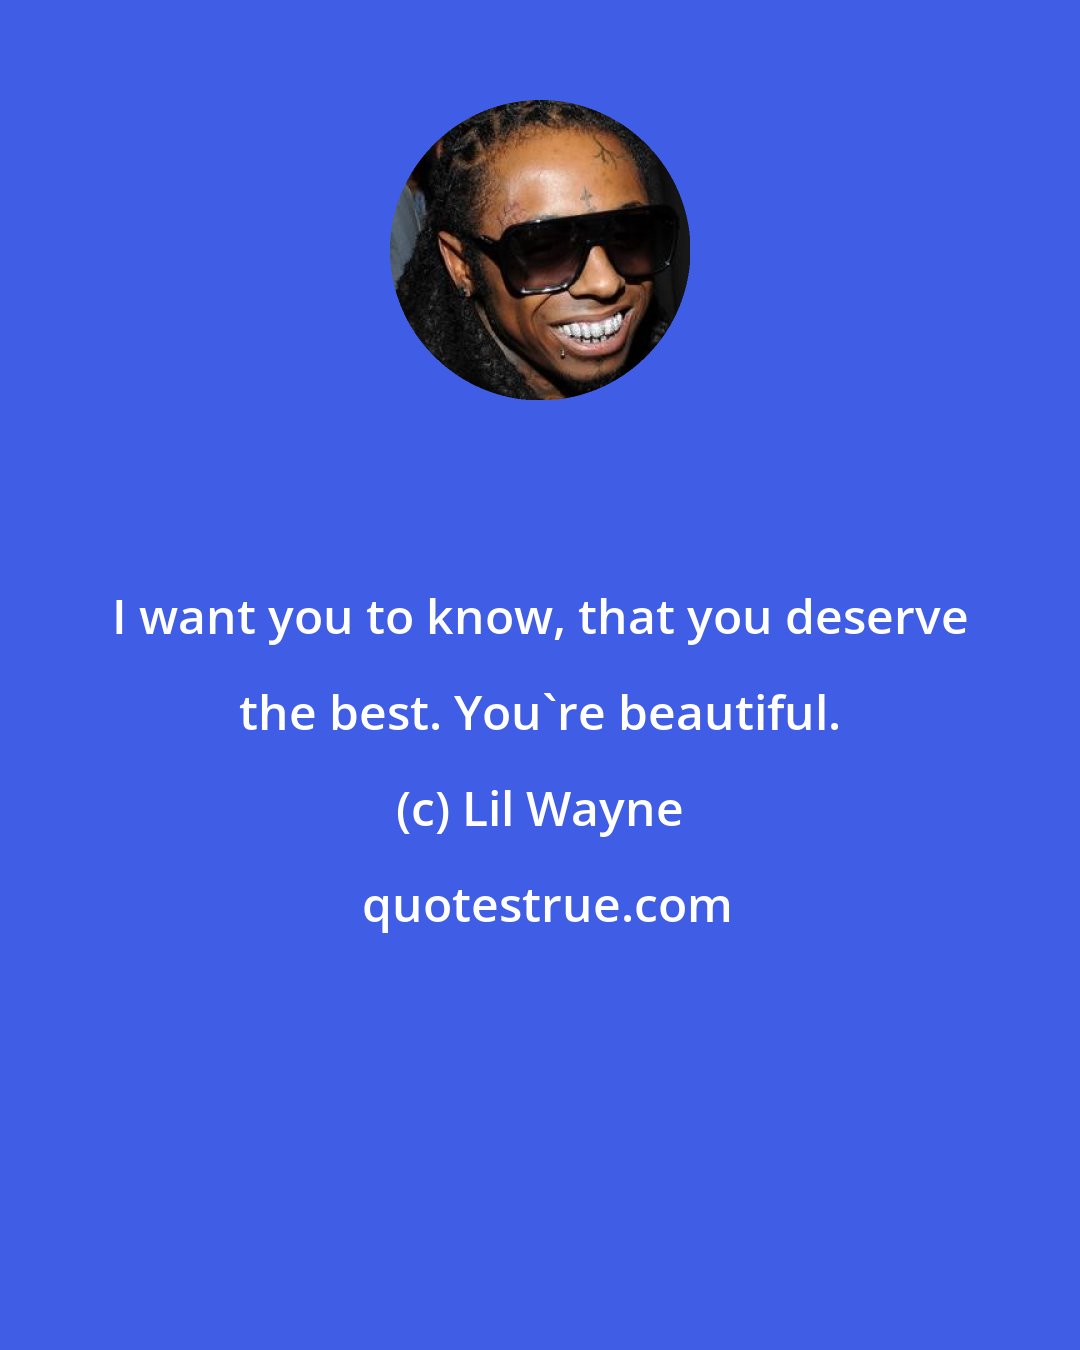 Lil Wayne: I want you to know, that you deserve the best. You're beautiful.